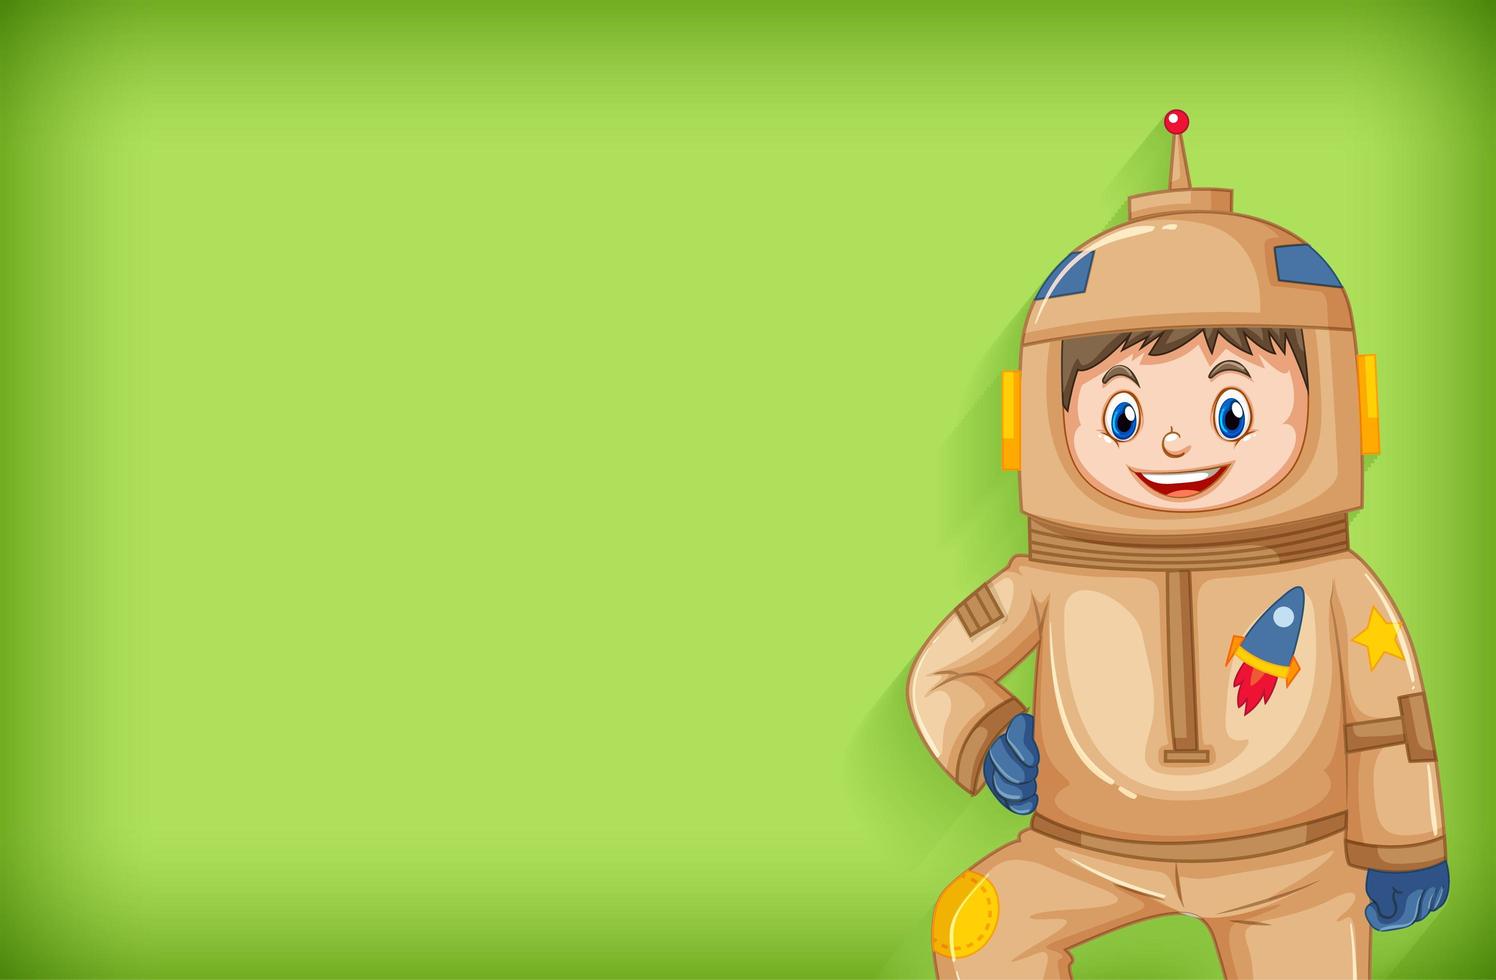 Plain background with astronaut in brown outfit vector